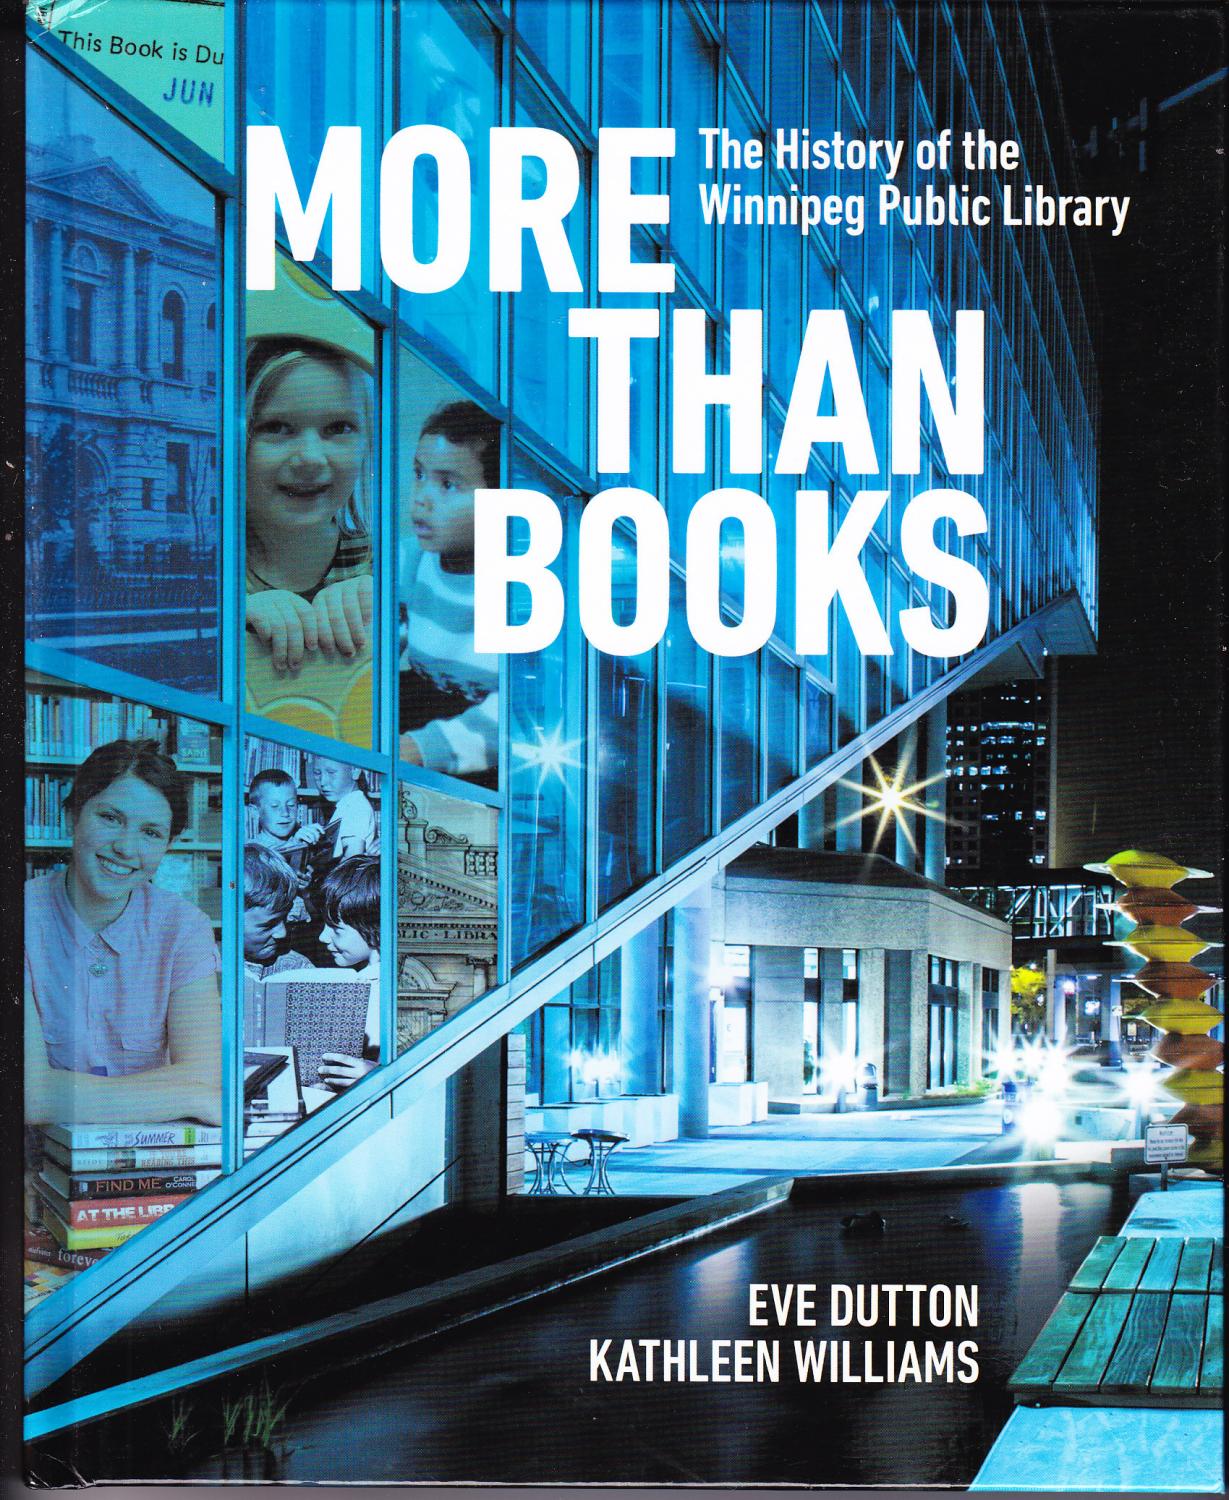 More than books : The history of the Winnipeg Public Library